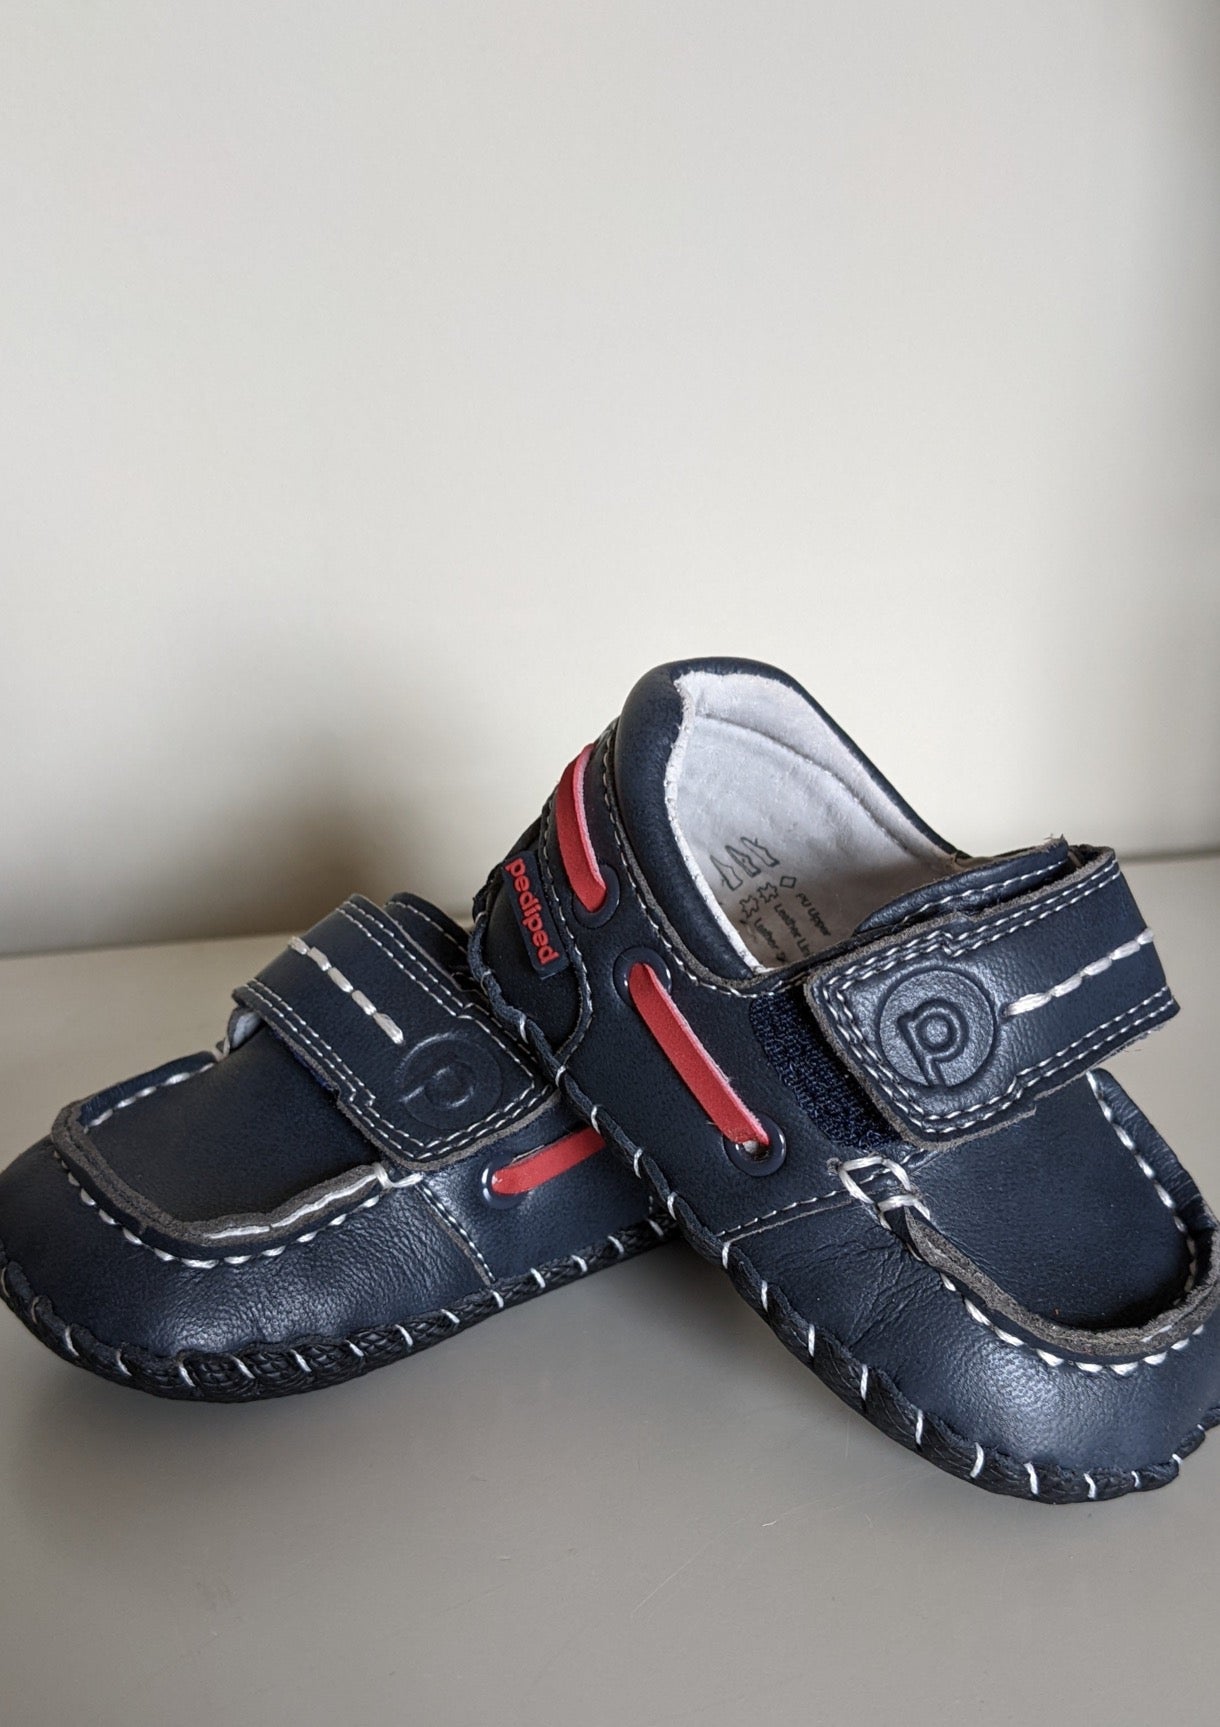 Pediped first leather shoes